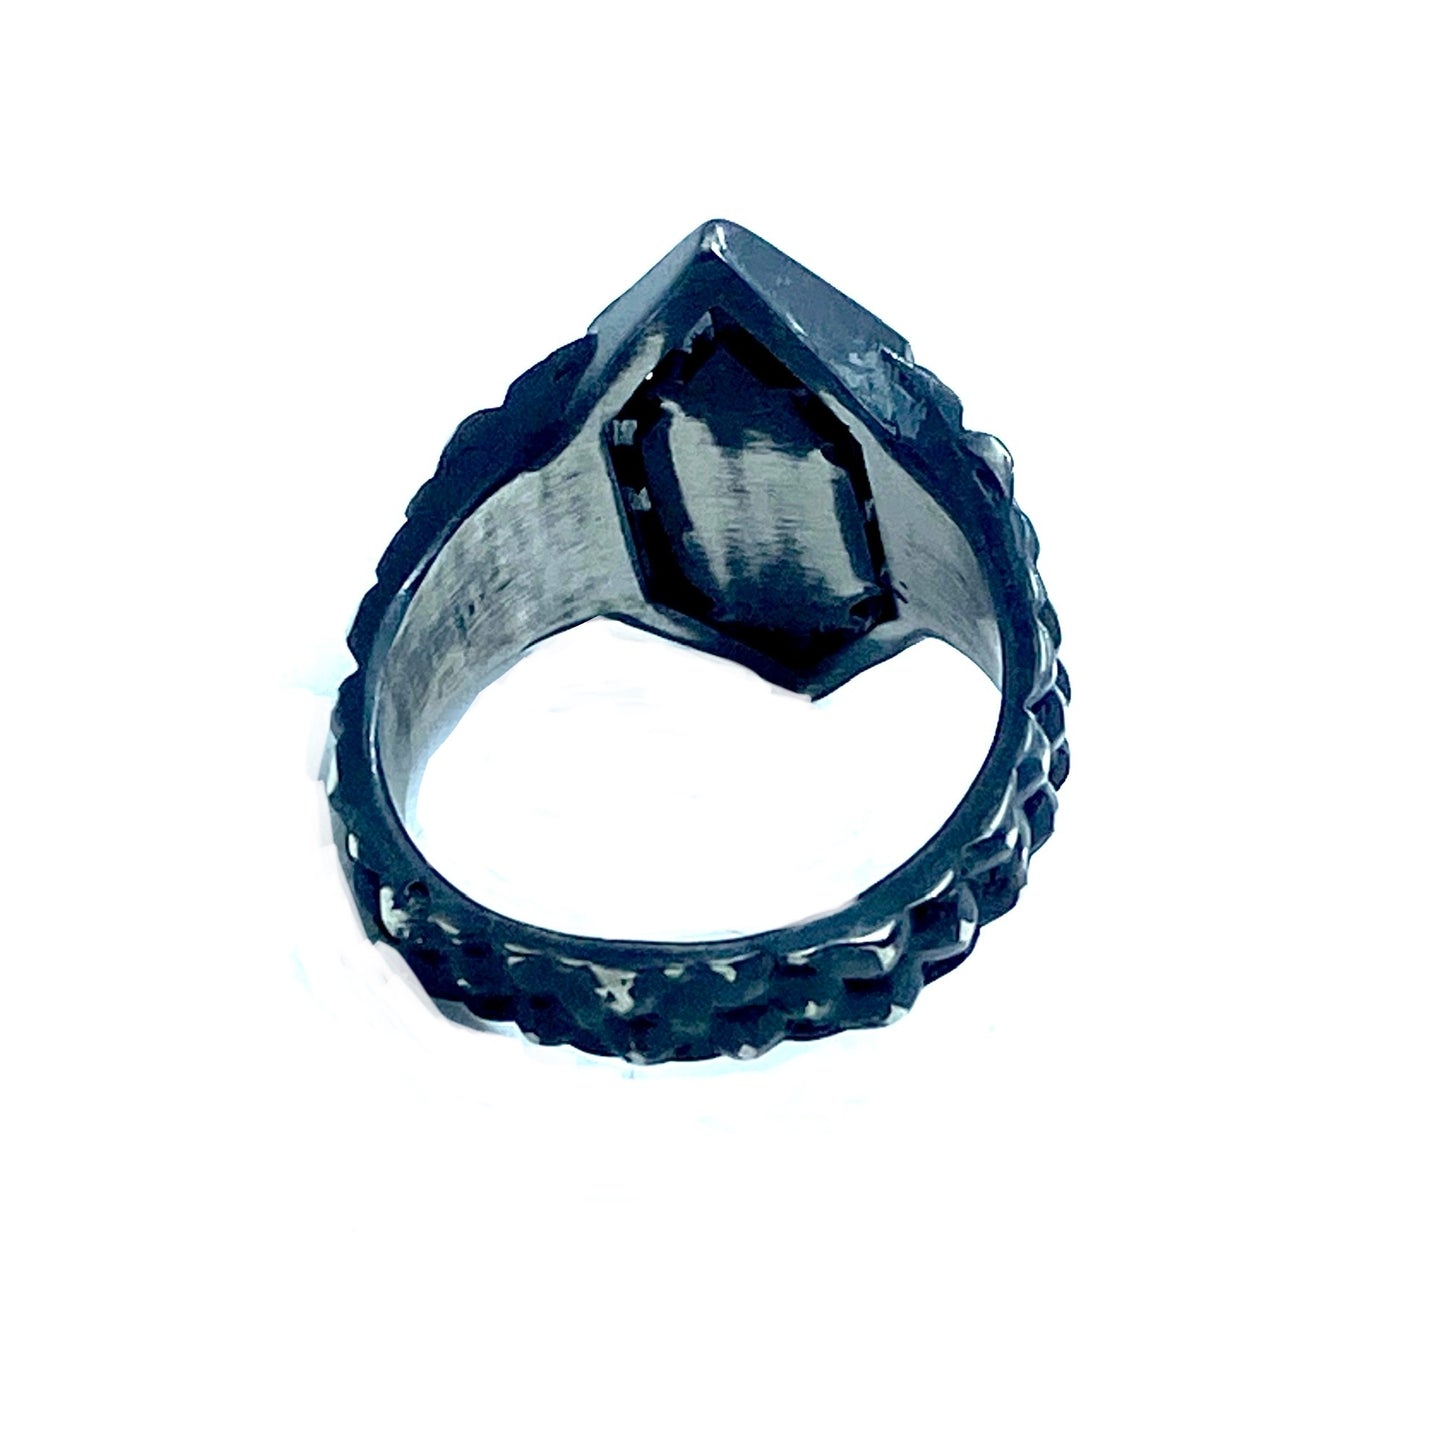 Soothsayer Ring with Moss Kyanite in Sterling Silver